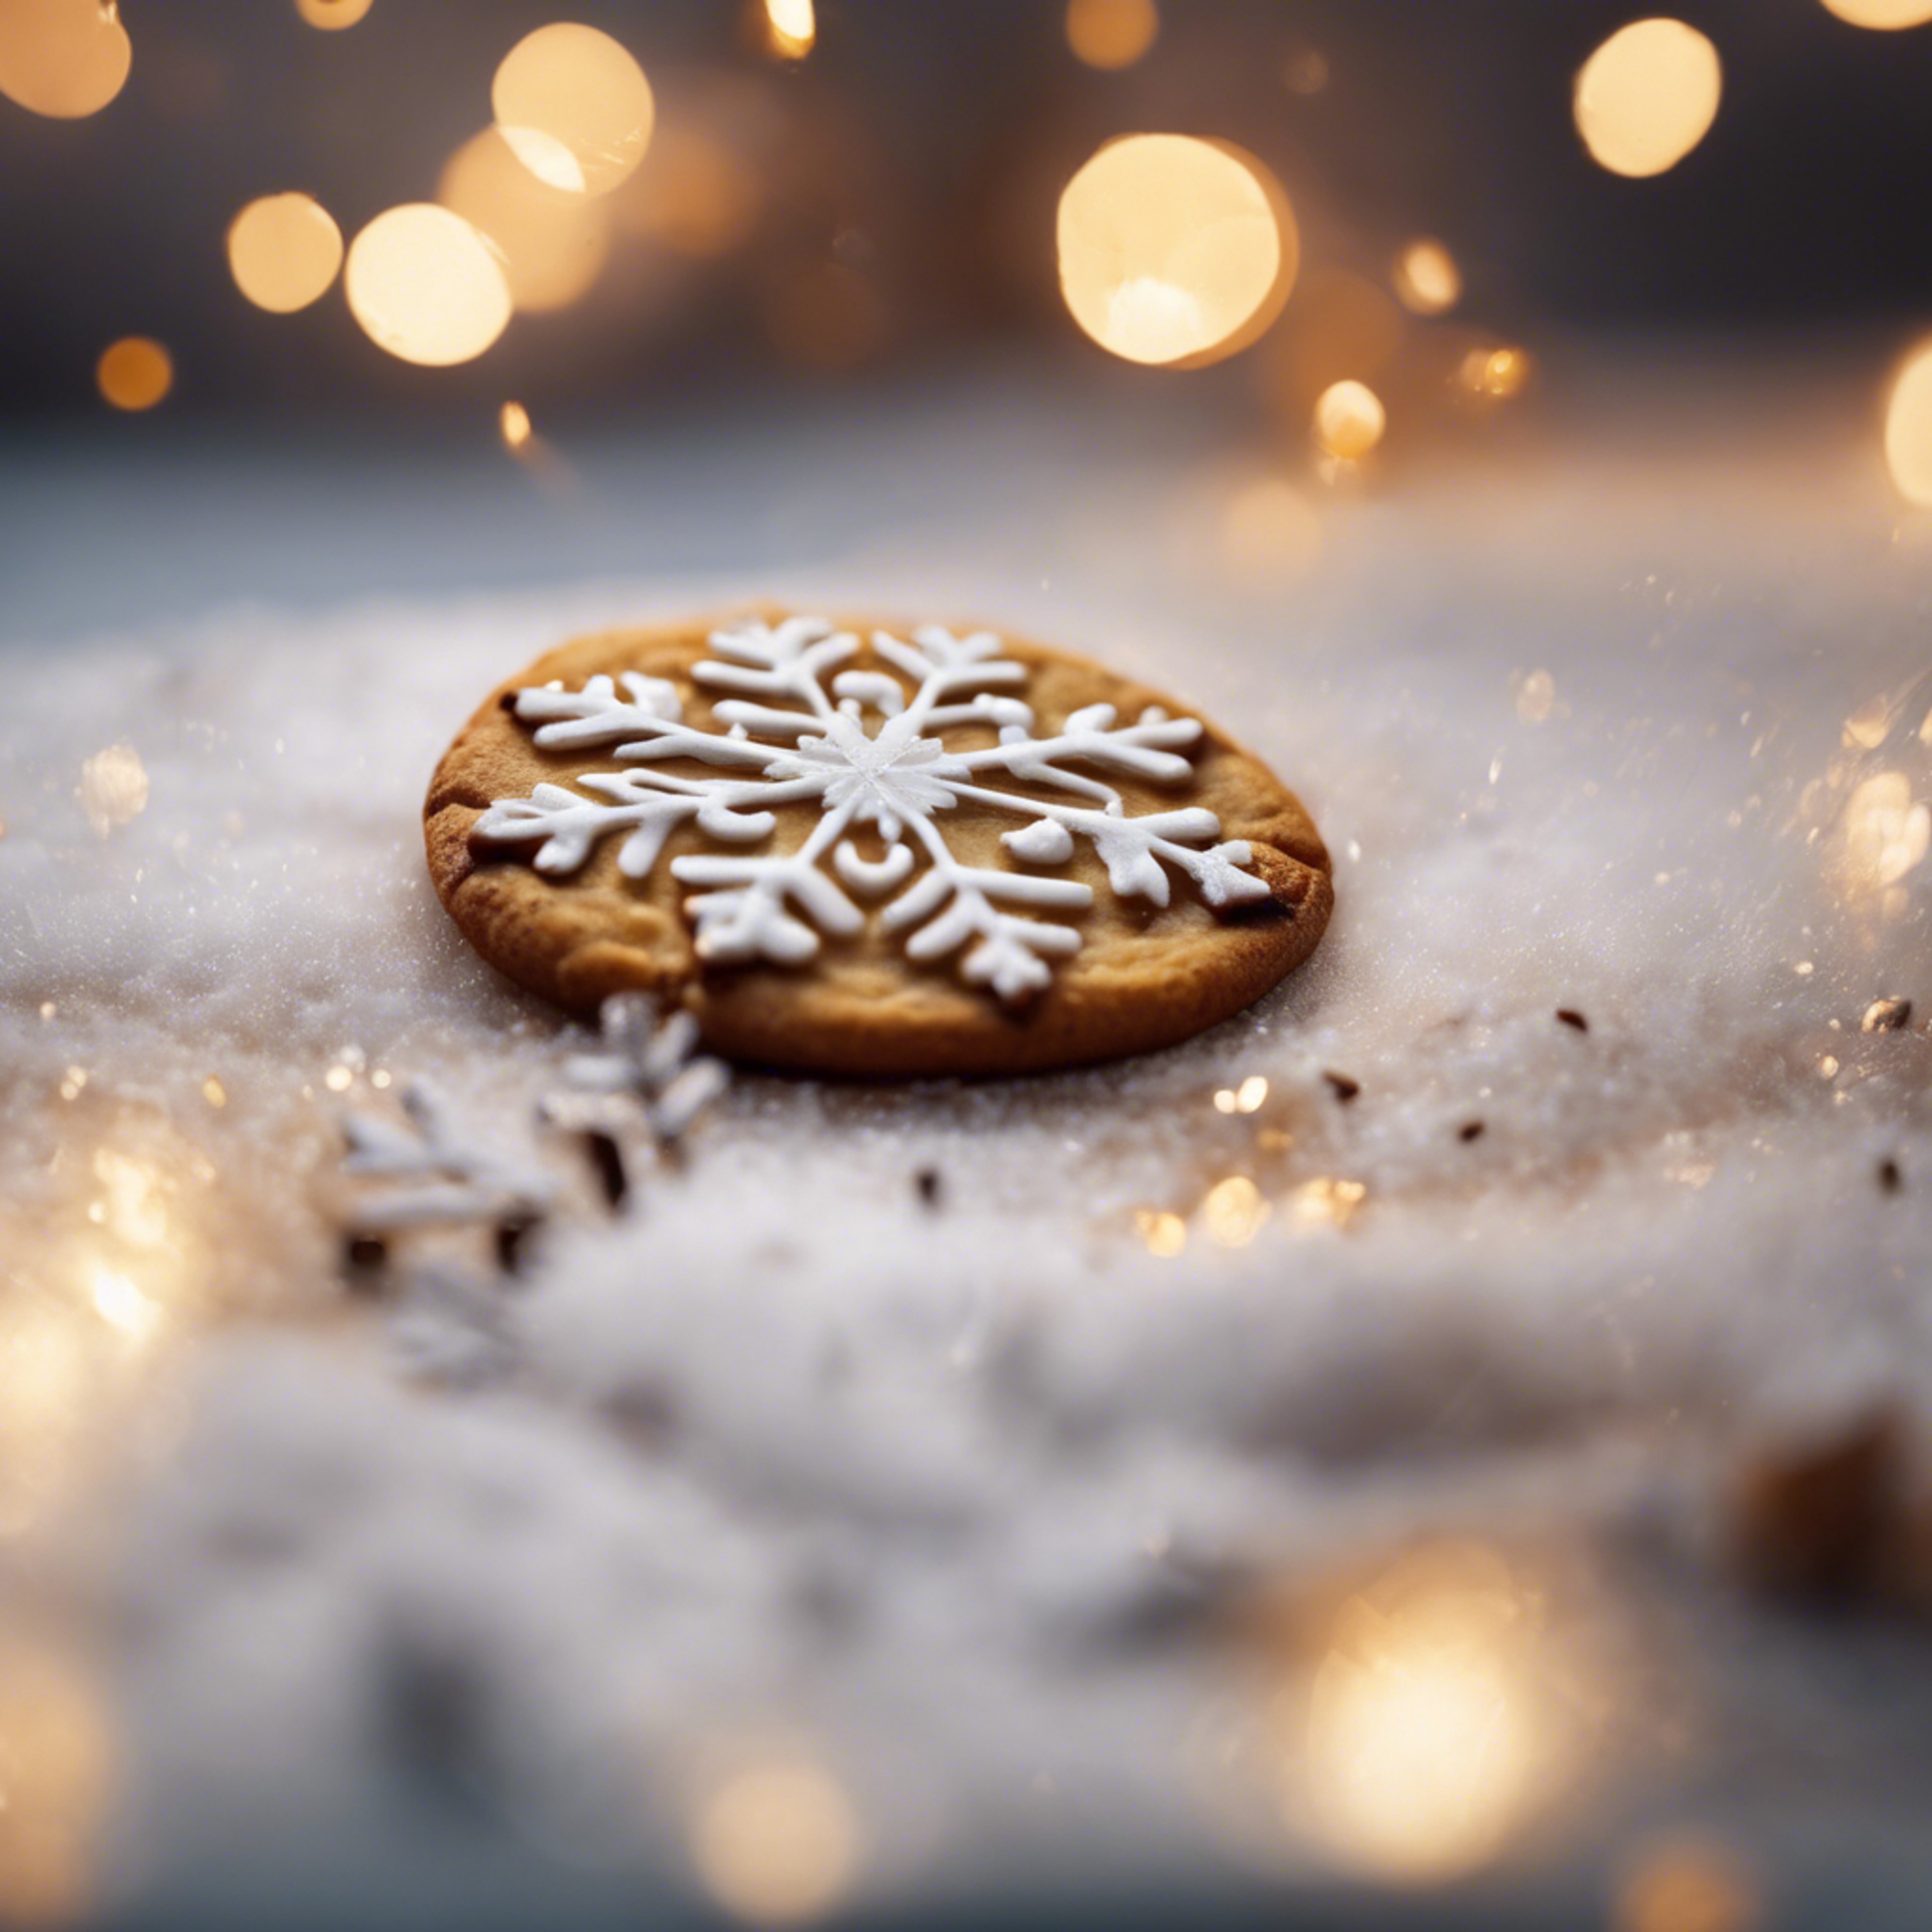 A freshly baked warm cookie with a snowflake landing on it. วอลล์เปเปอร์[89e6bcadefb047bd9a34]